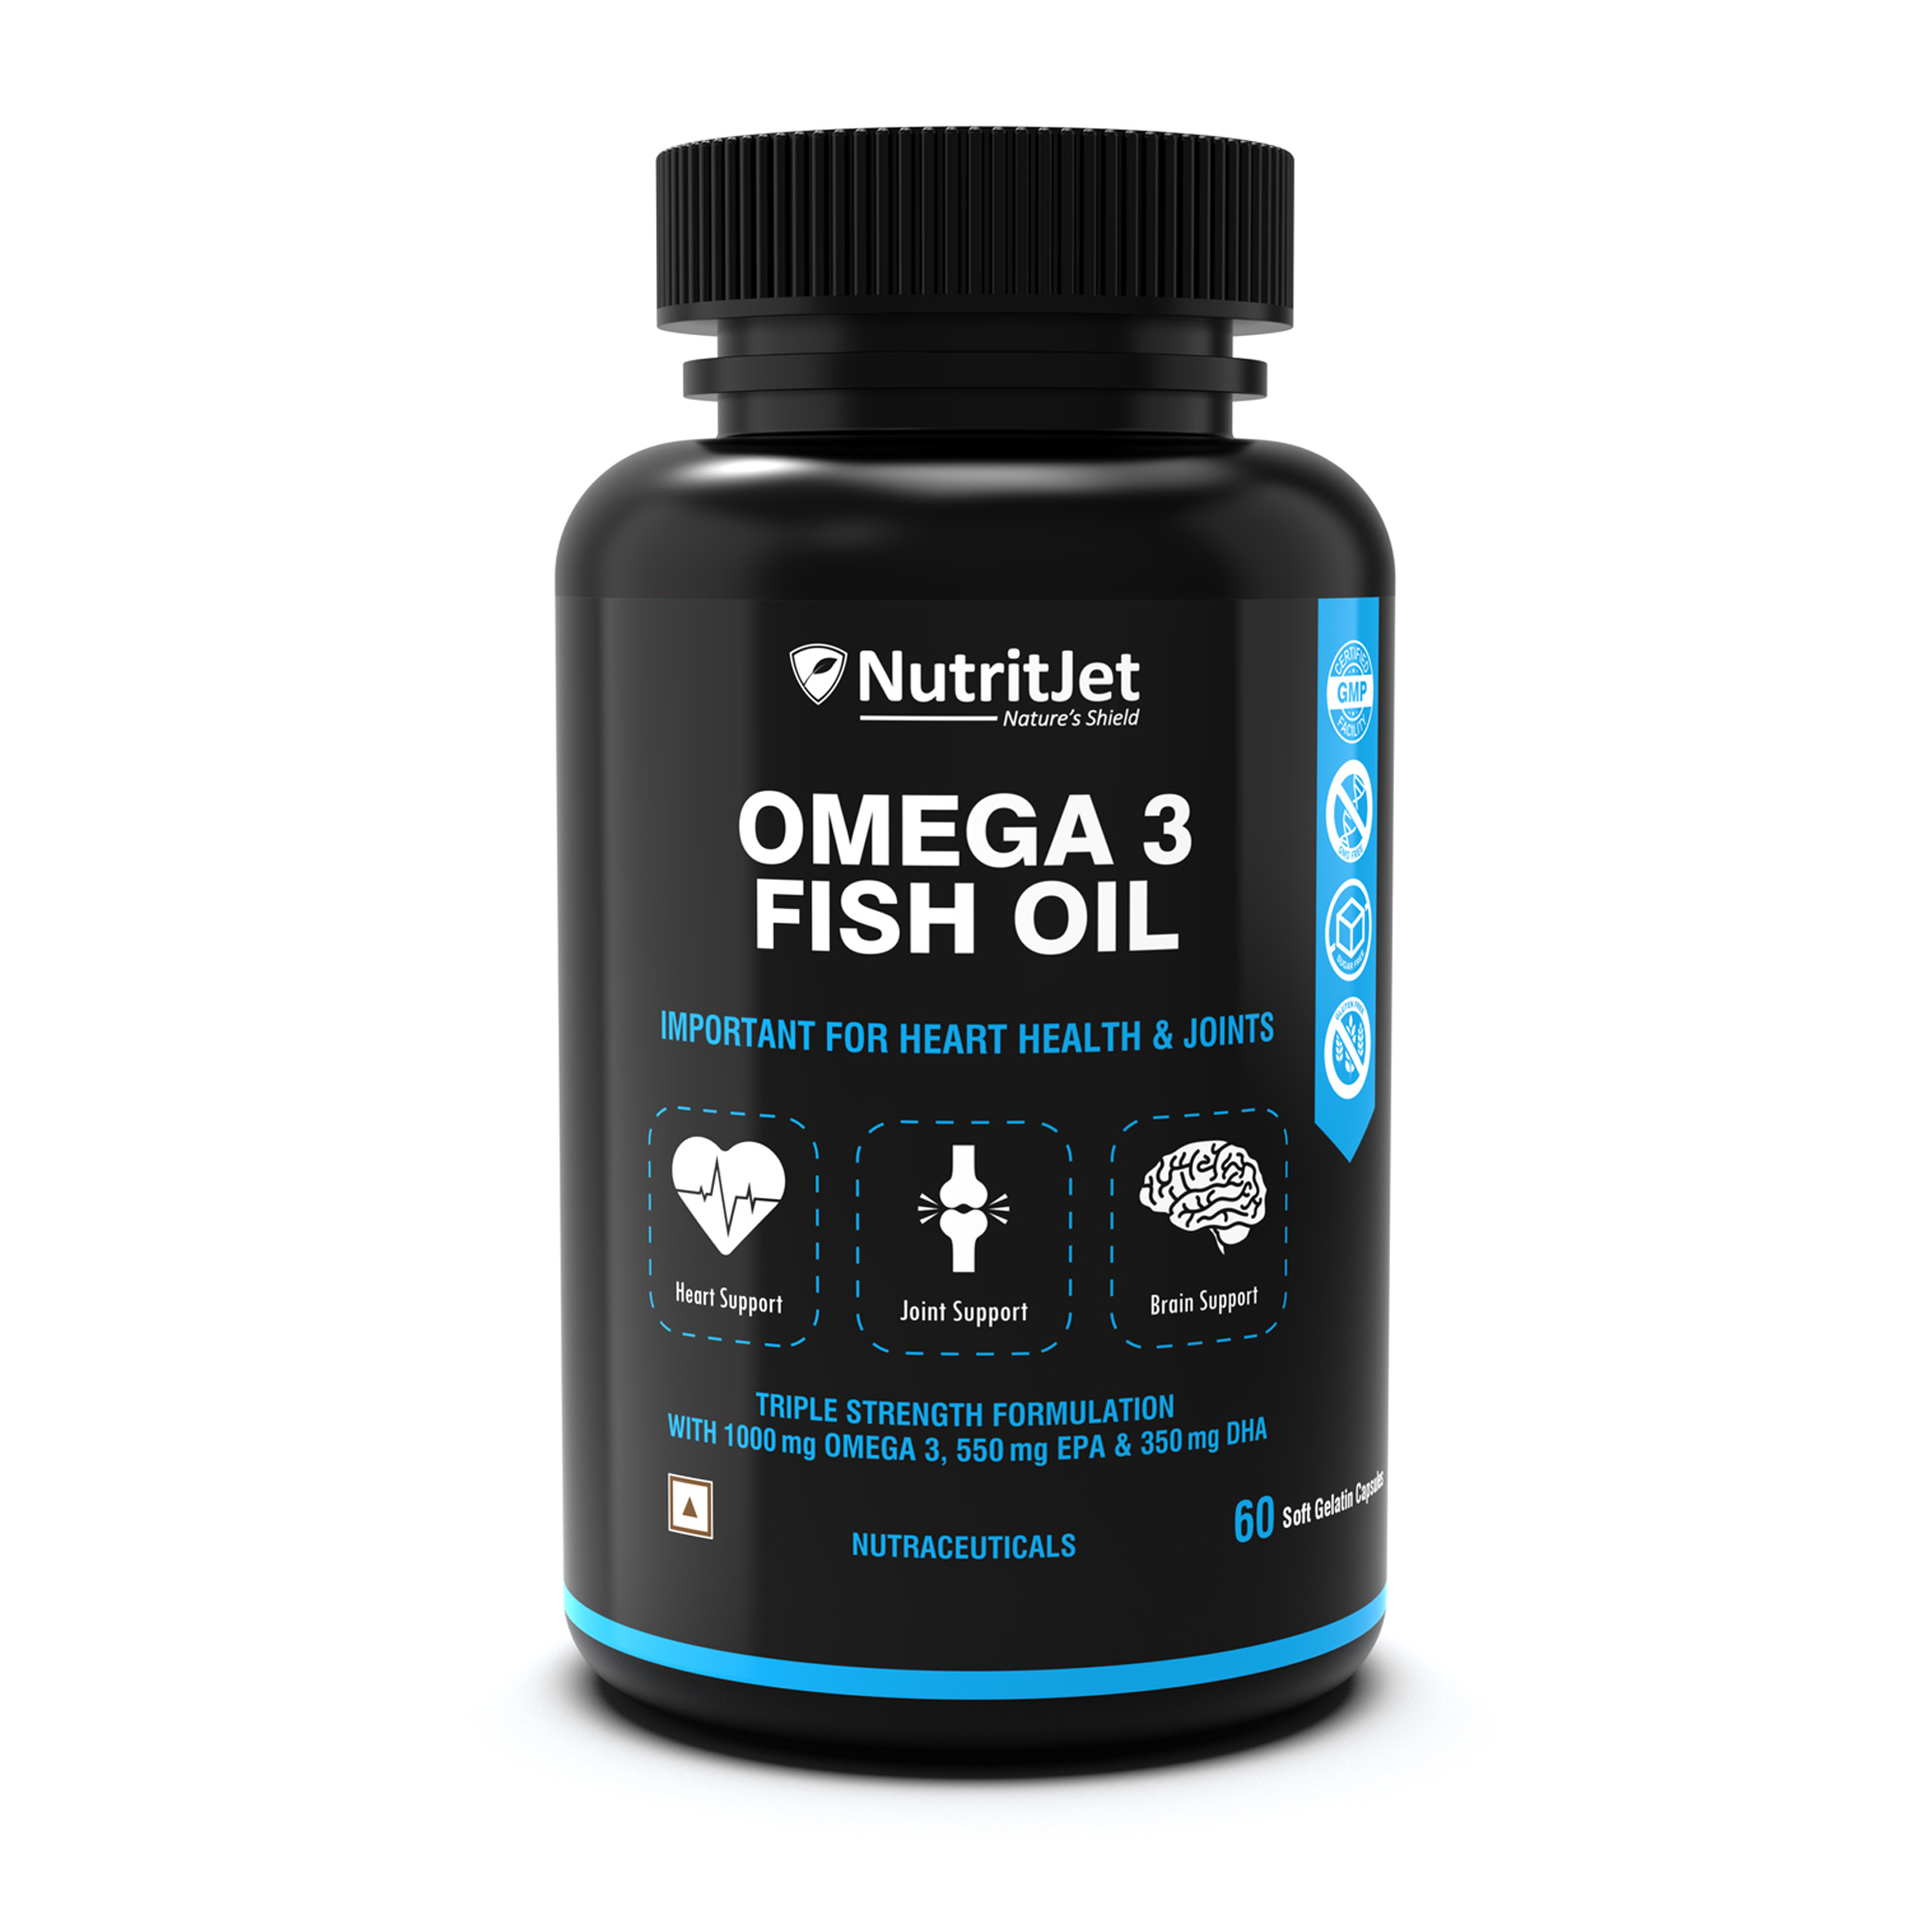 NutritJet Omega 3 Fish Oil 1000mg High Strength with 550 mg EPA and 350 mg  DHA - 60 Capsule - NutritJet